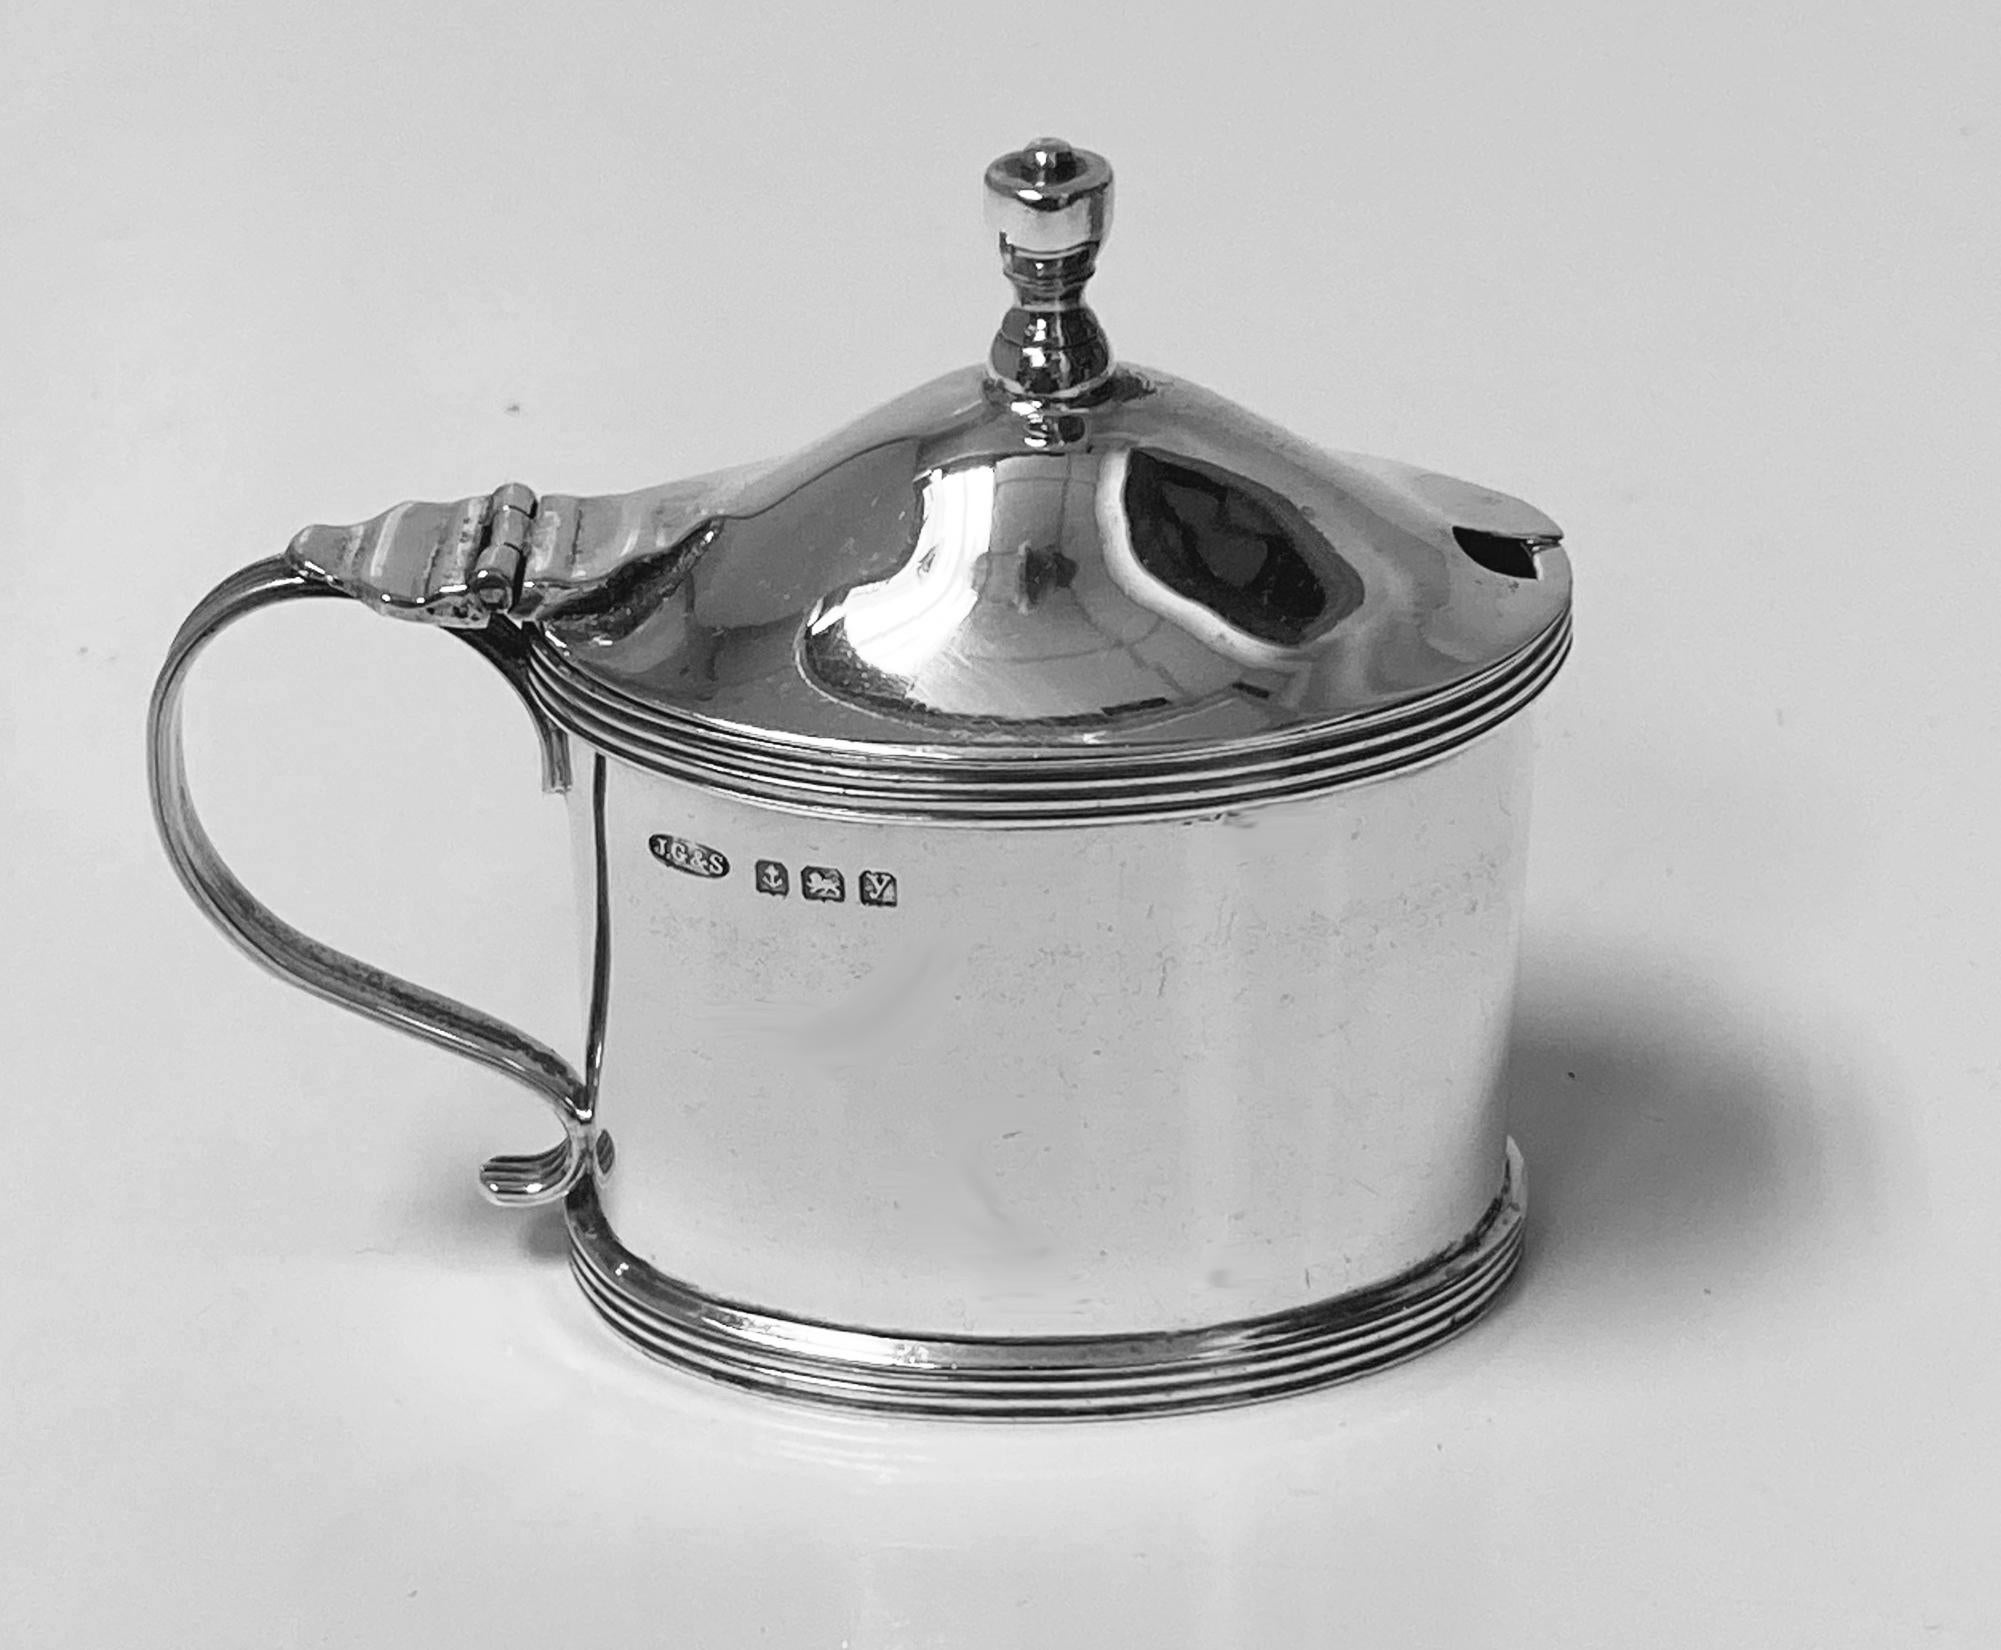 Antique English Silver Mustard Pot Birmingham 1923 John Grinsell. Plain ovoid shape, simple thread upper and lower rims, and handle. Cobalt blue glass fitted liner (small chip but perfectly useable). Measures: 3.00 x 2.50 x 1.50 inches. Silver